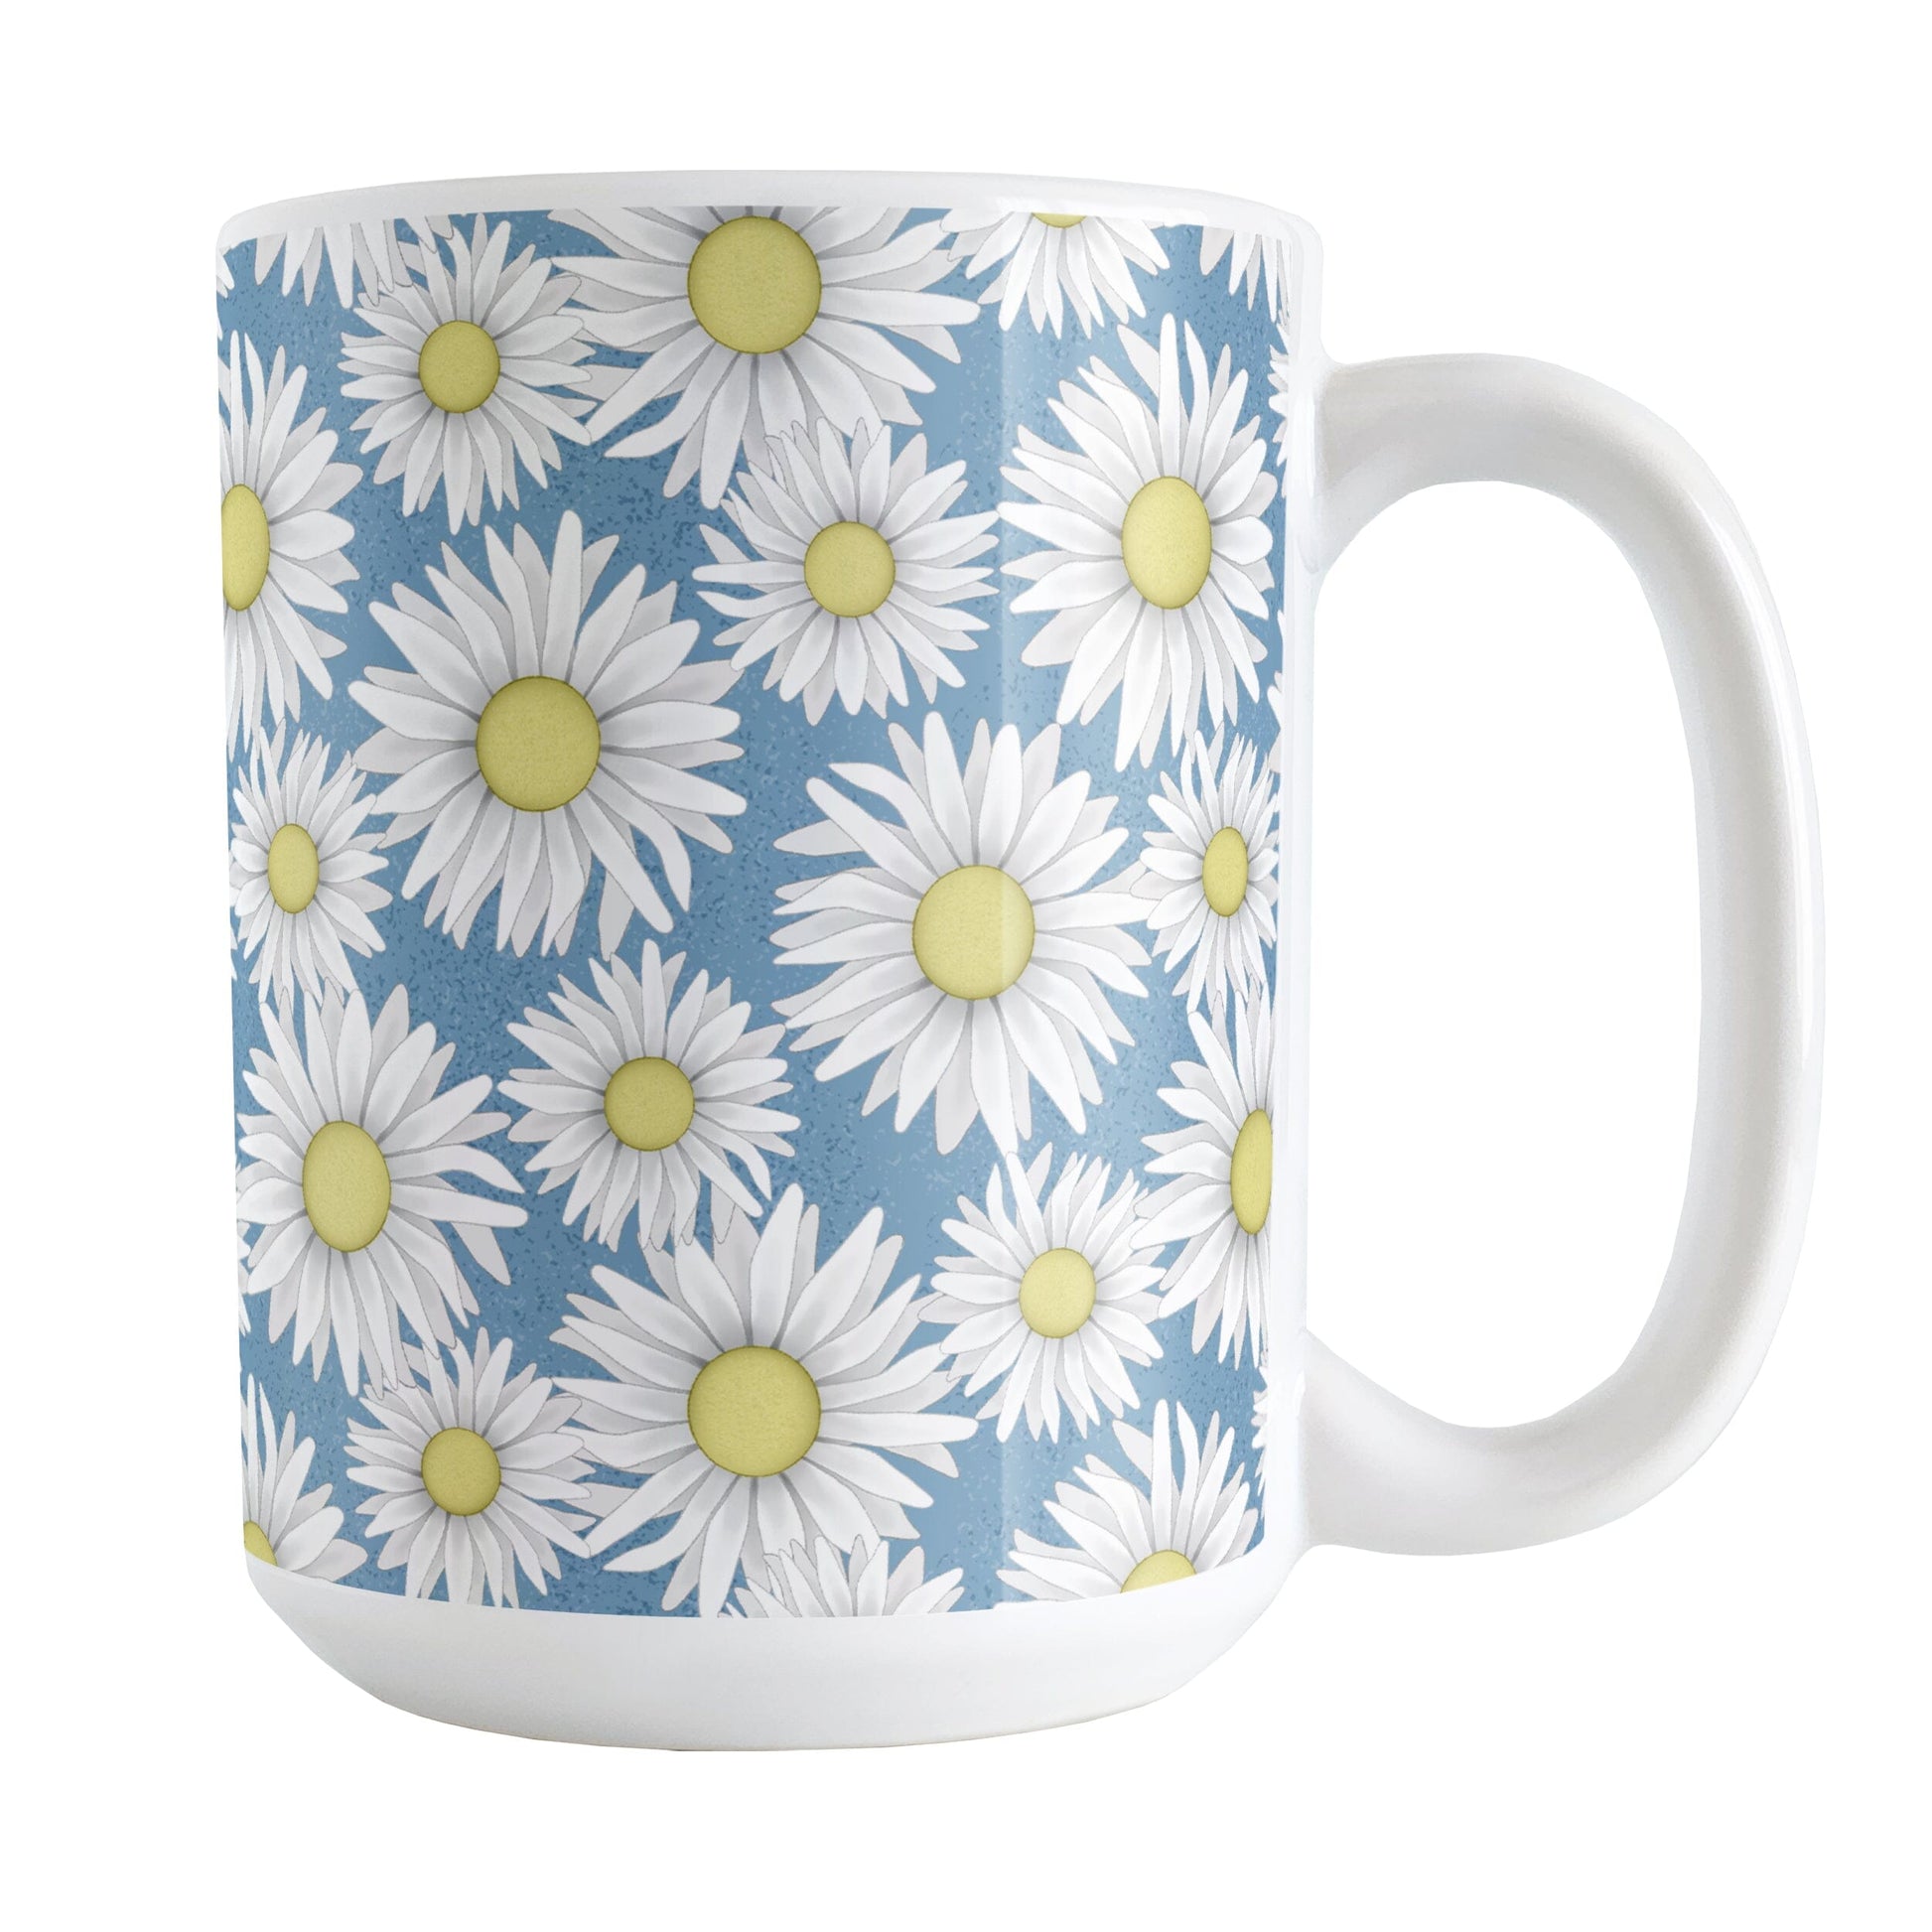 Blue Daisy Pattern Mug (15oz) at Amy's Coffee Mugs. A ceramic coffee mug designed with a pretty pattern of white daisy flowers with yellow centers over a speckled blue background that wraps around the mug to the handle. 